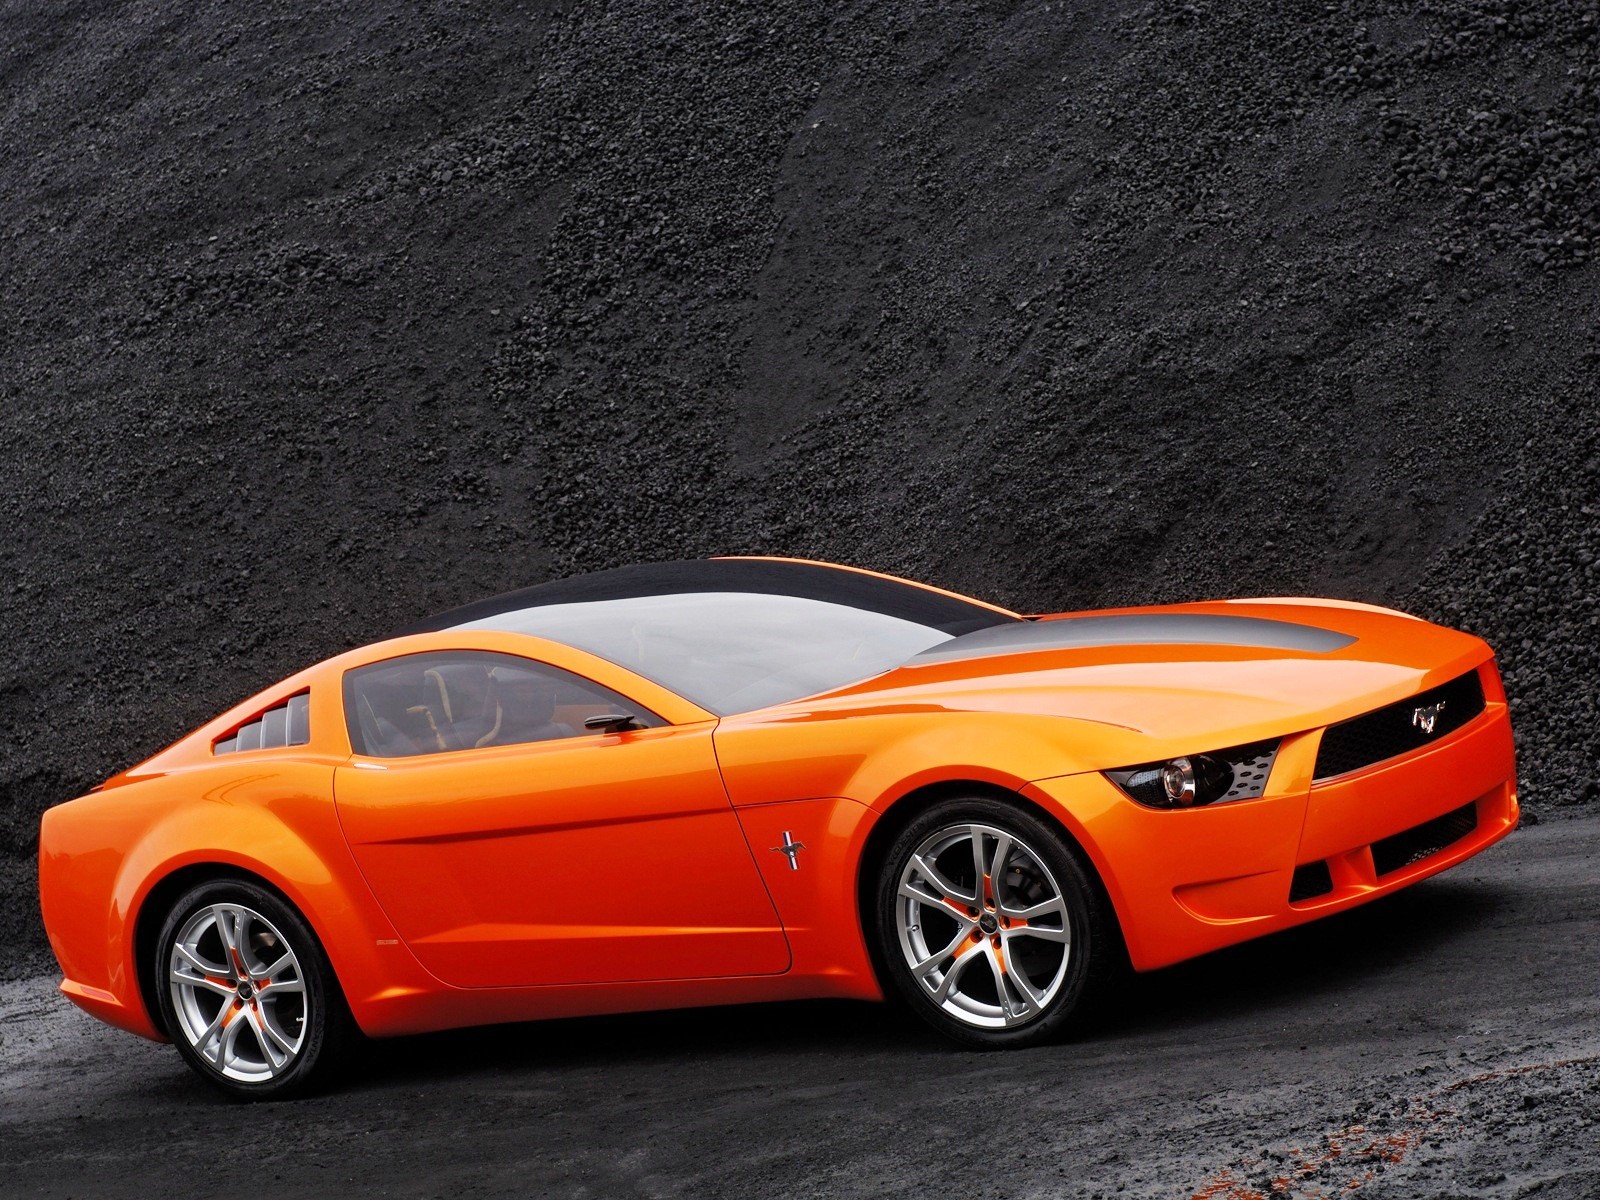 Ford Mustang Gt New HD Wallpaper